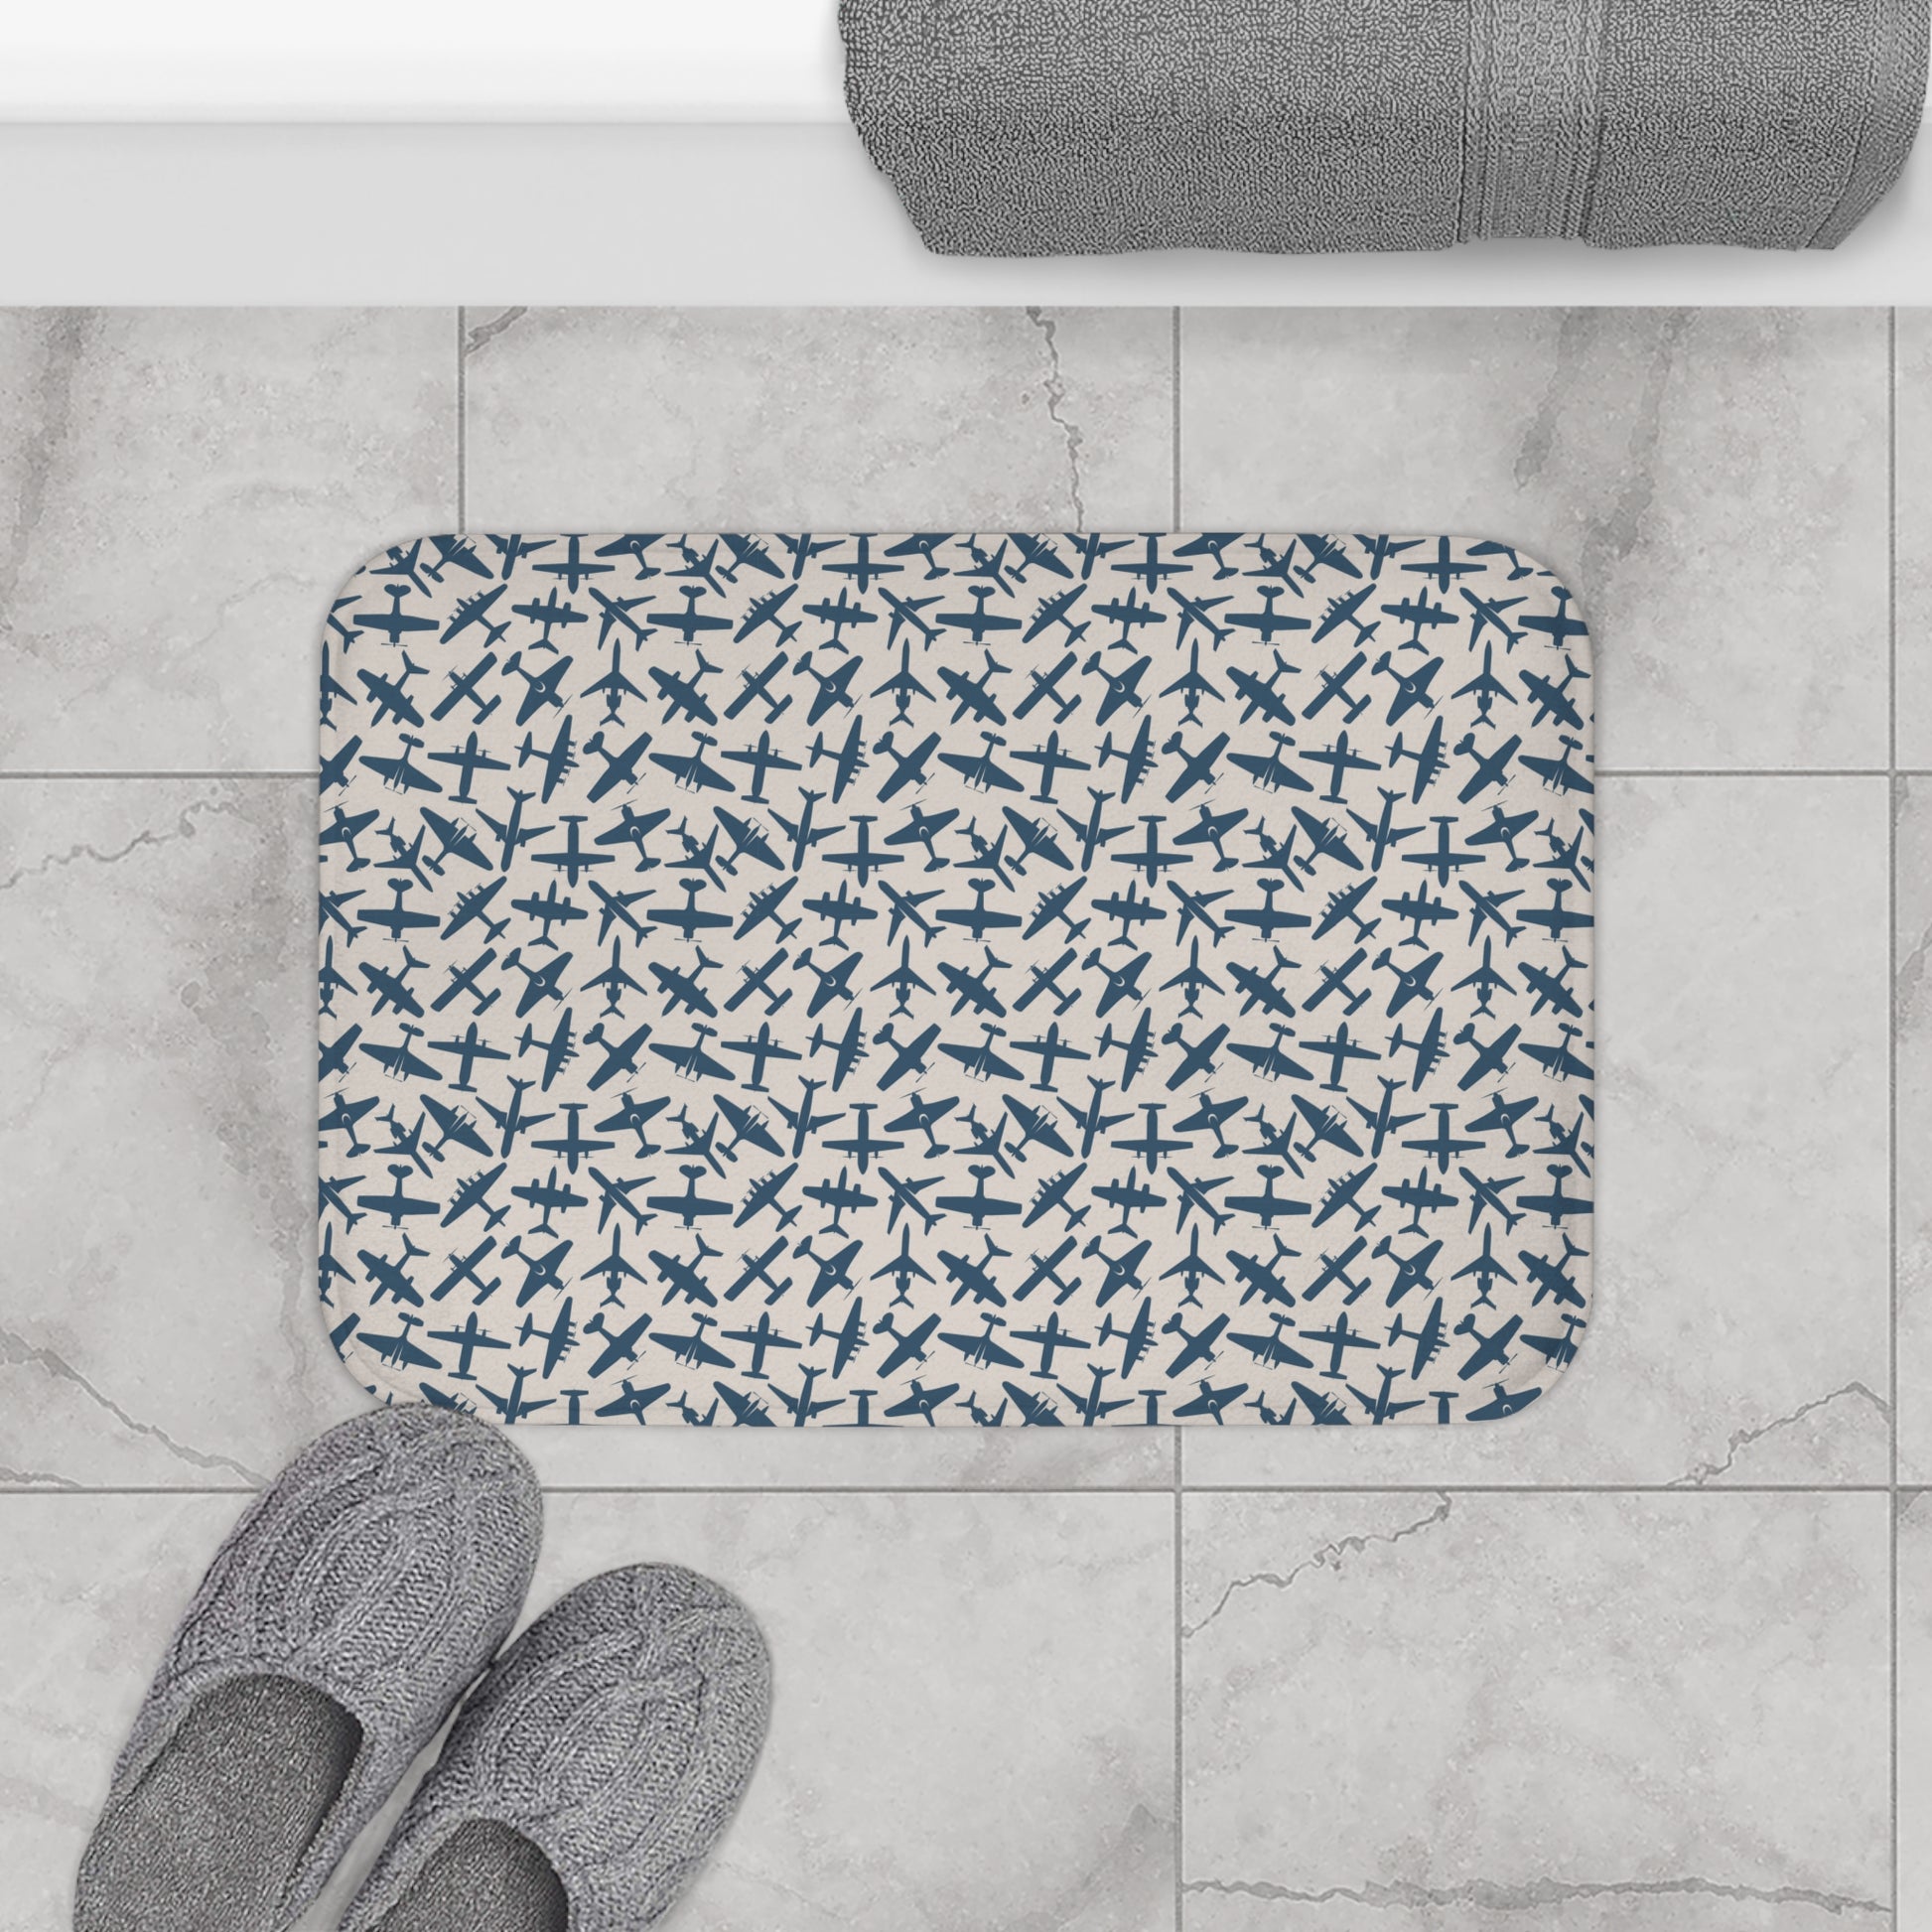 aviation merchandise, airplane patterned bath mat, reference pic 2